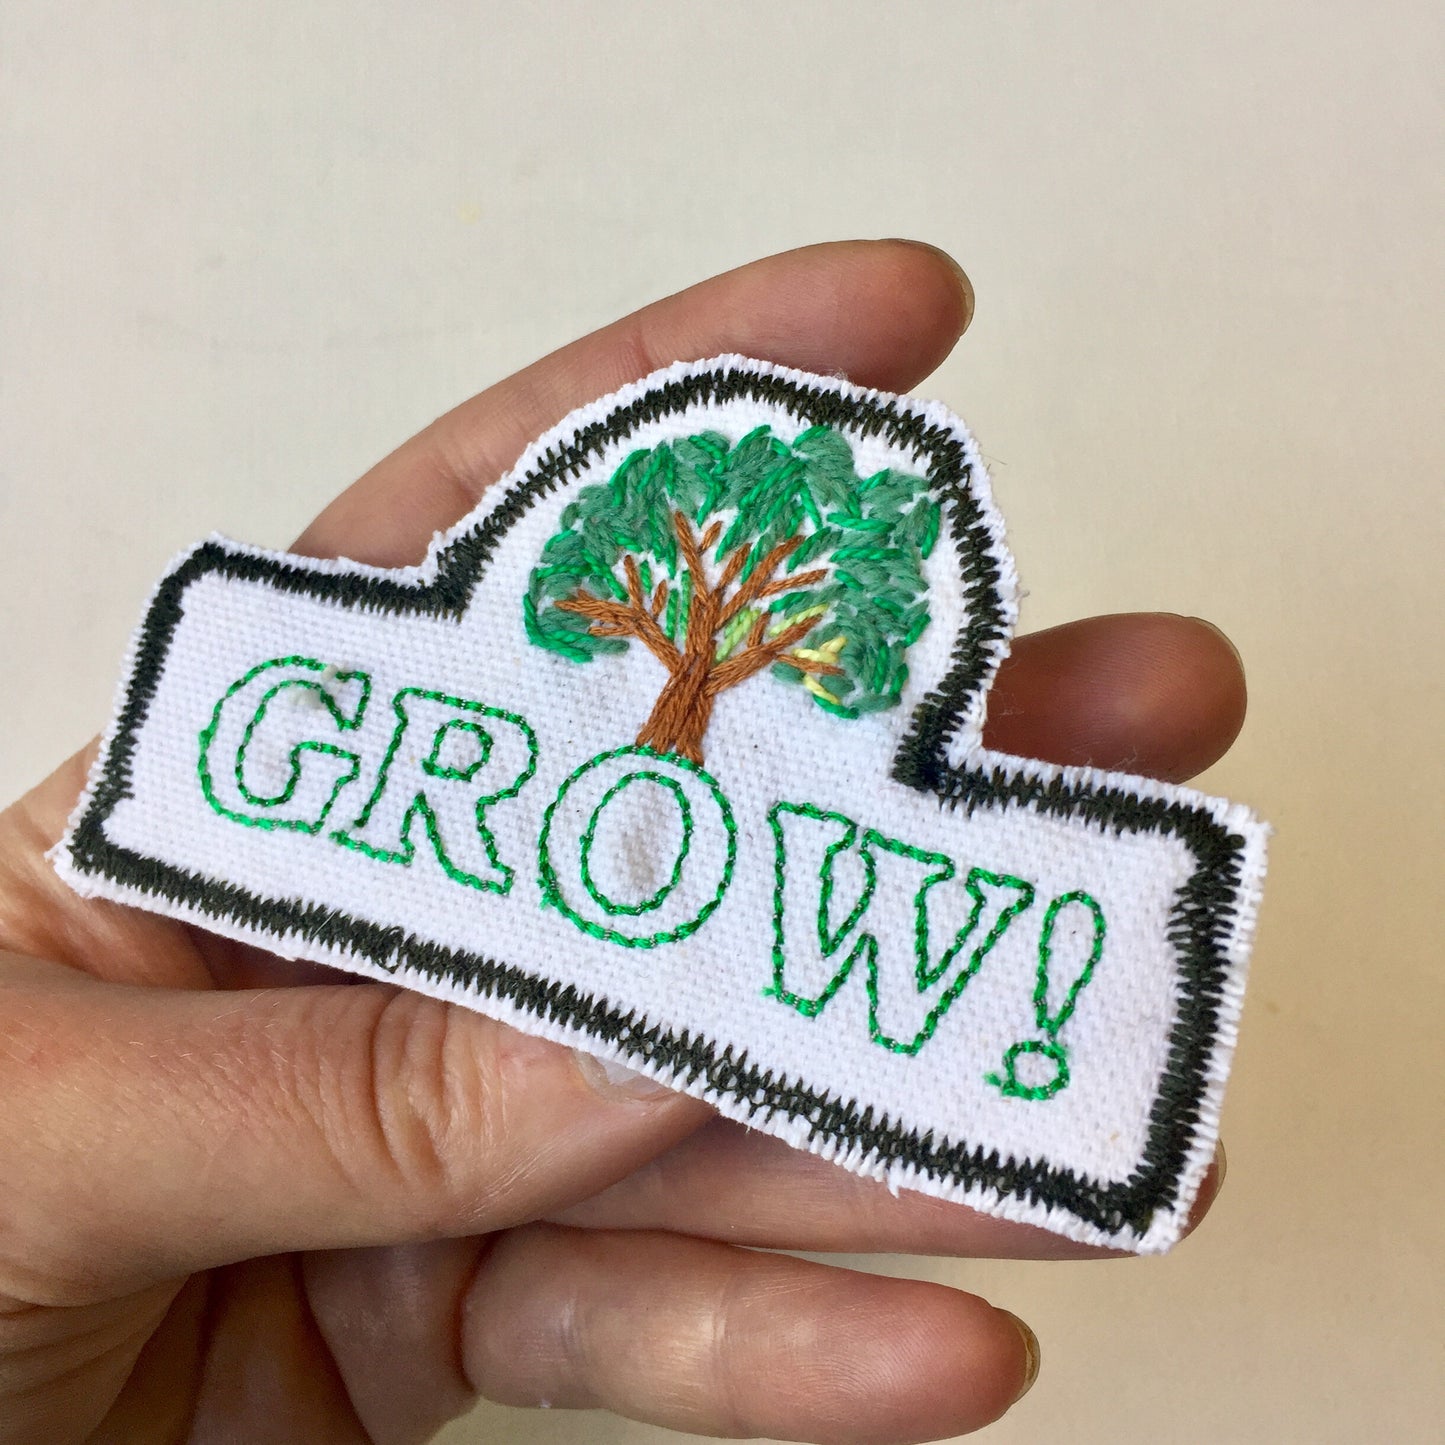 GROW! Embroidered Patch on Denim. Free Shipping